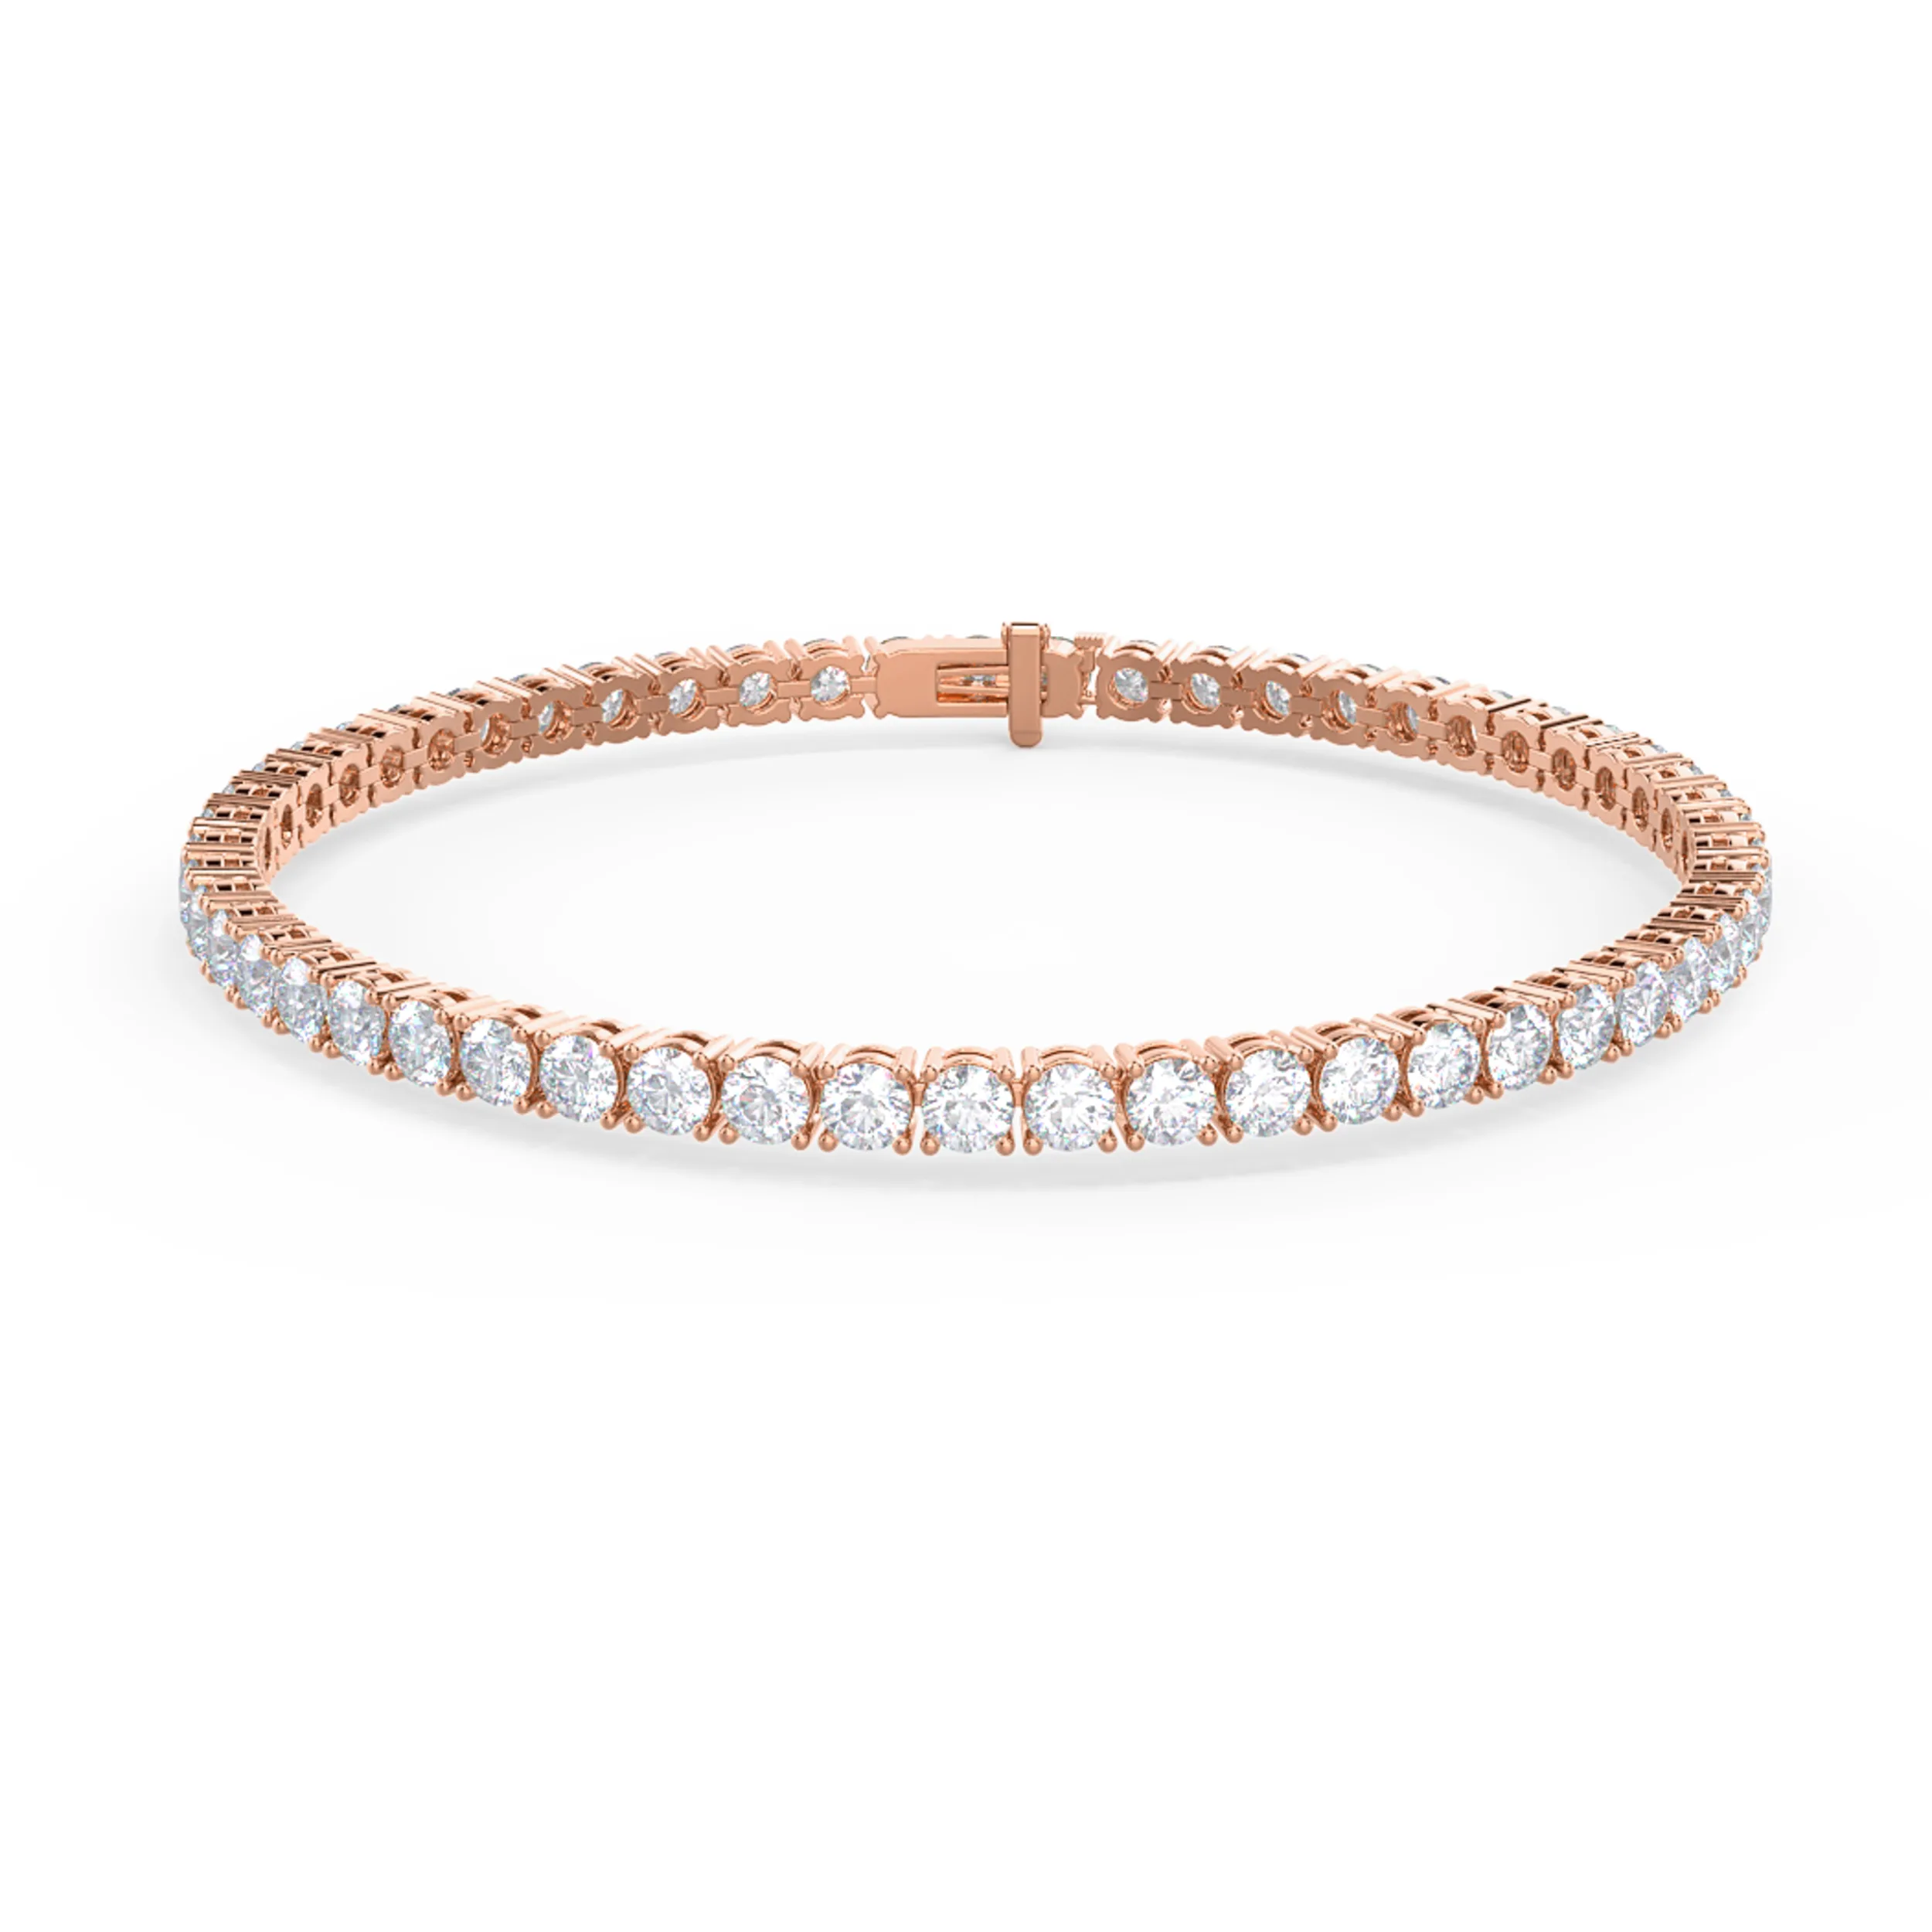 Hand Selected 6.0 ct Round Lab Grown Diamonds set in Rose Gold Four Prong Round Diamond Tennis Bracelet